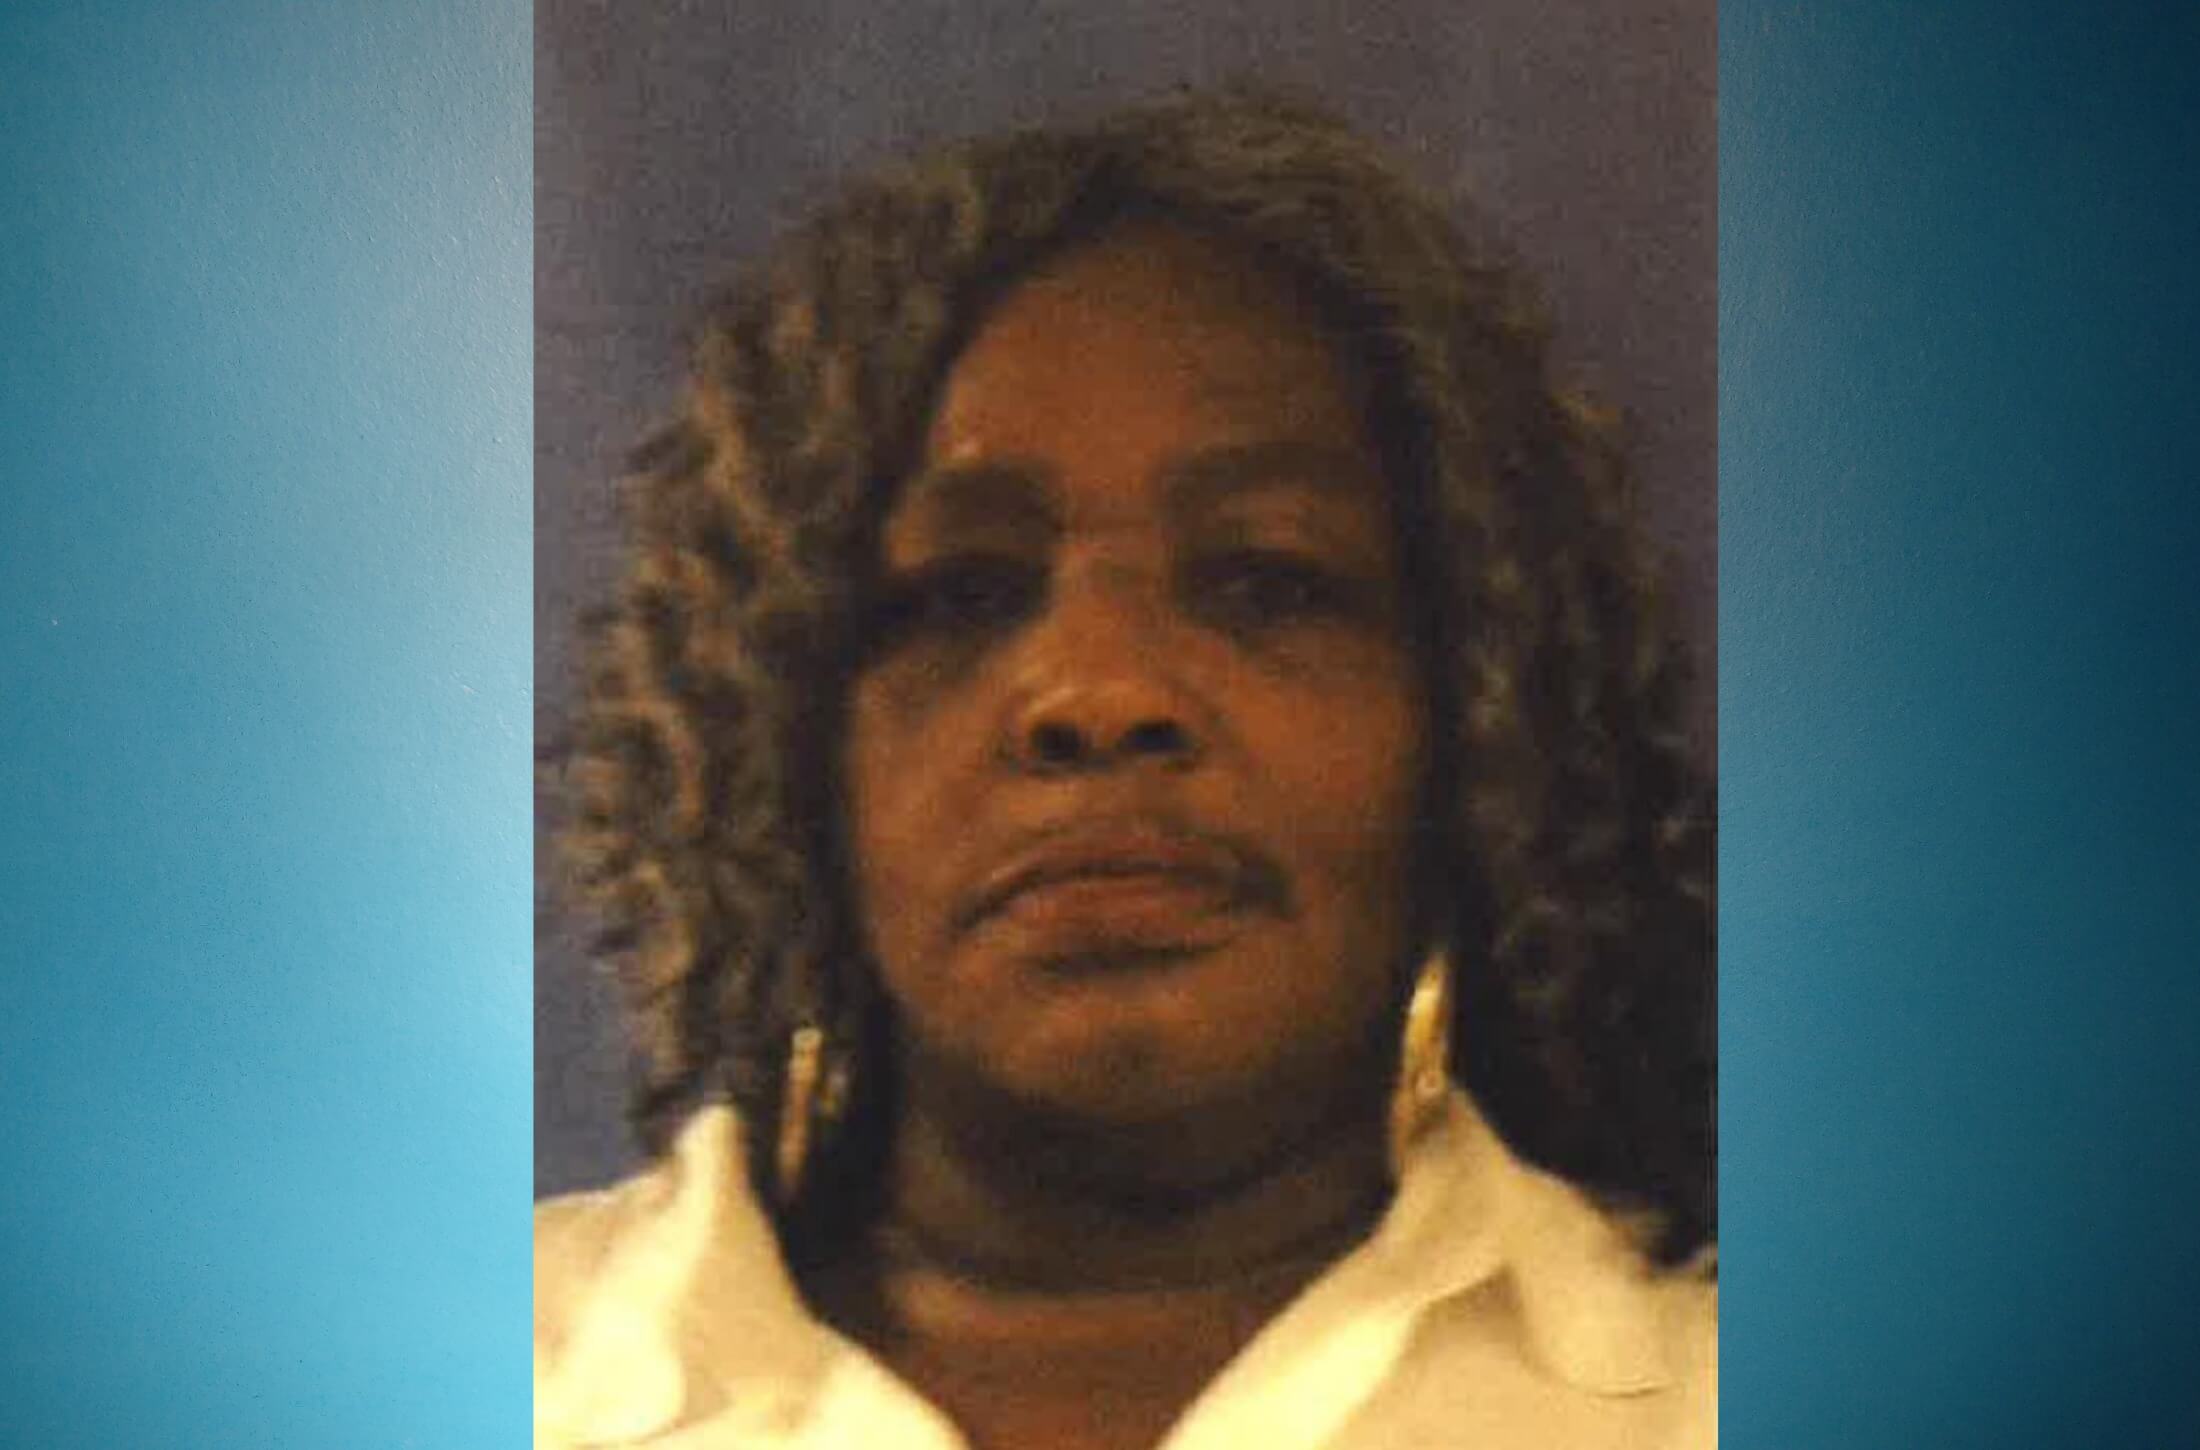 Silver Alert issued for missing 67 year old Mississippi woman with medical condition